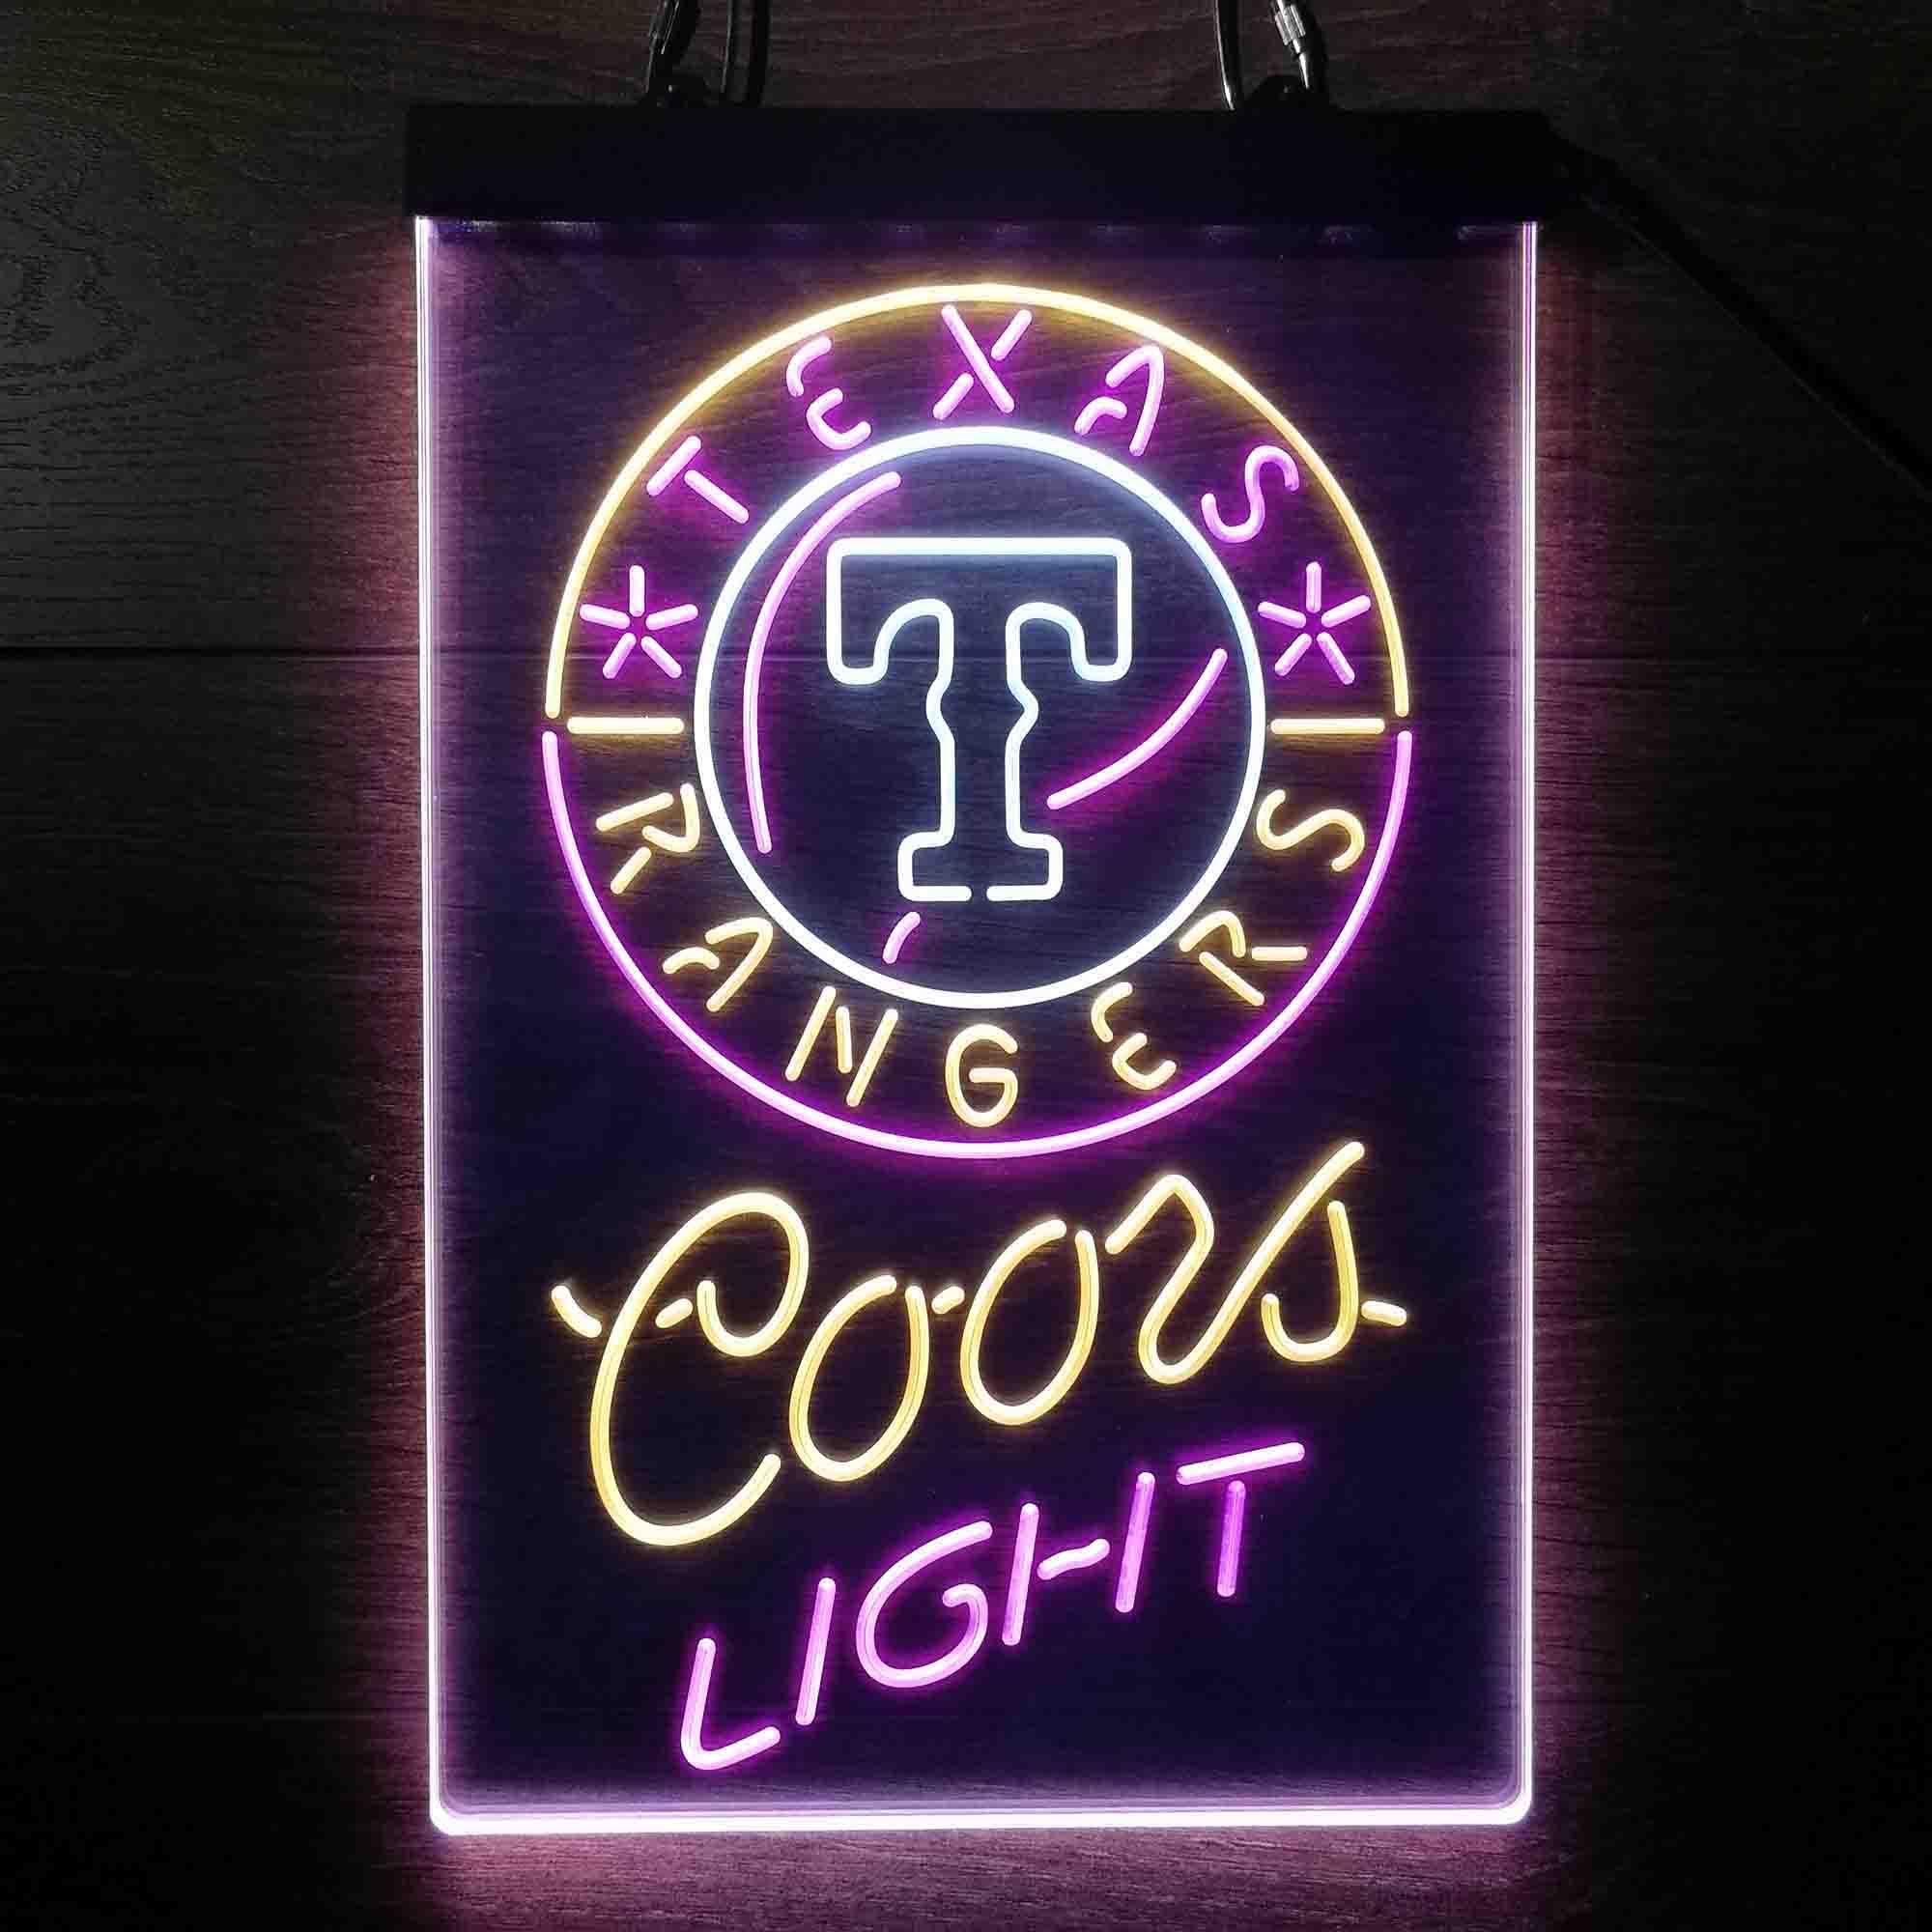 Texas Rangers Coors Light Neon LED Sign 3 Colors